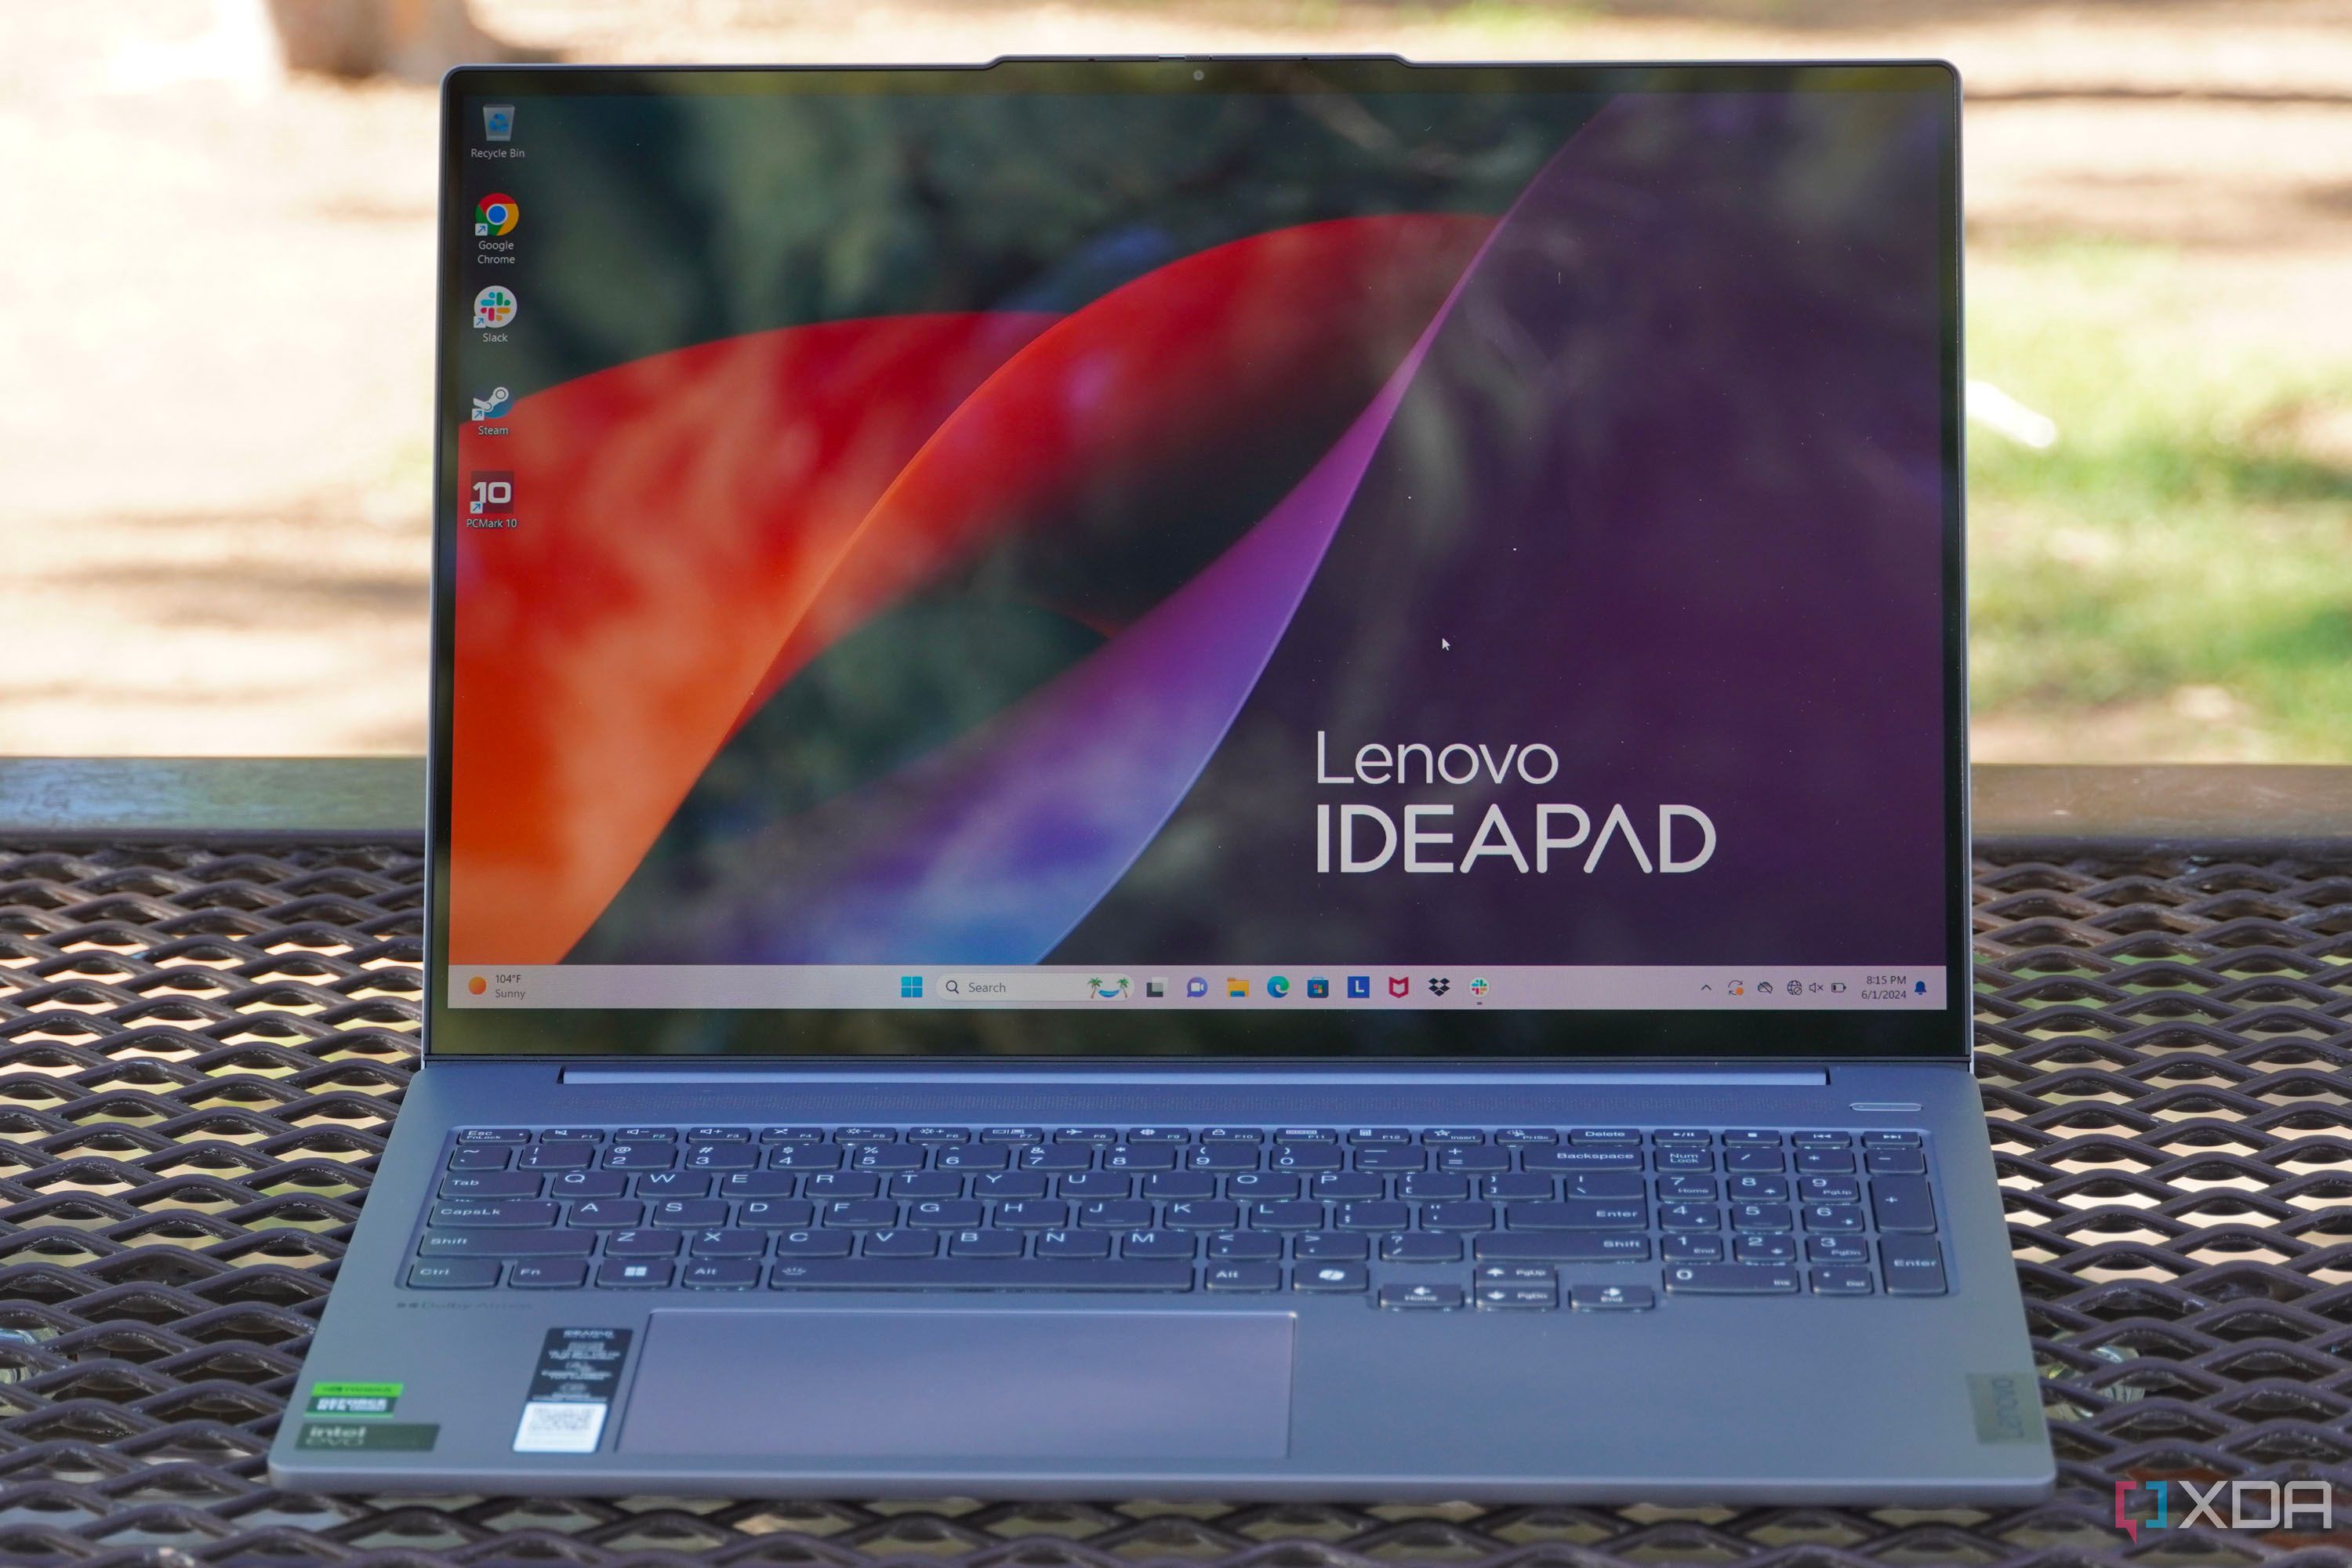 The Lenovo IdeaPad Pro 5i on a table showing the desktop.